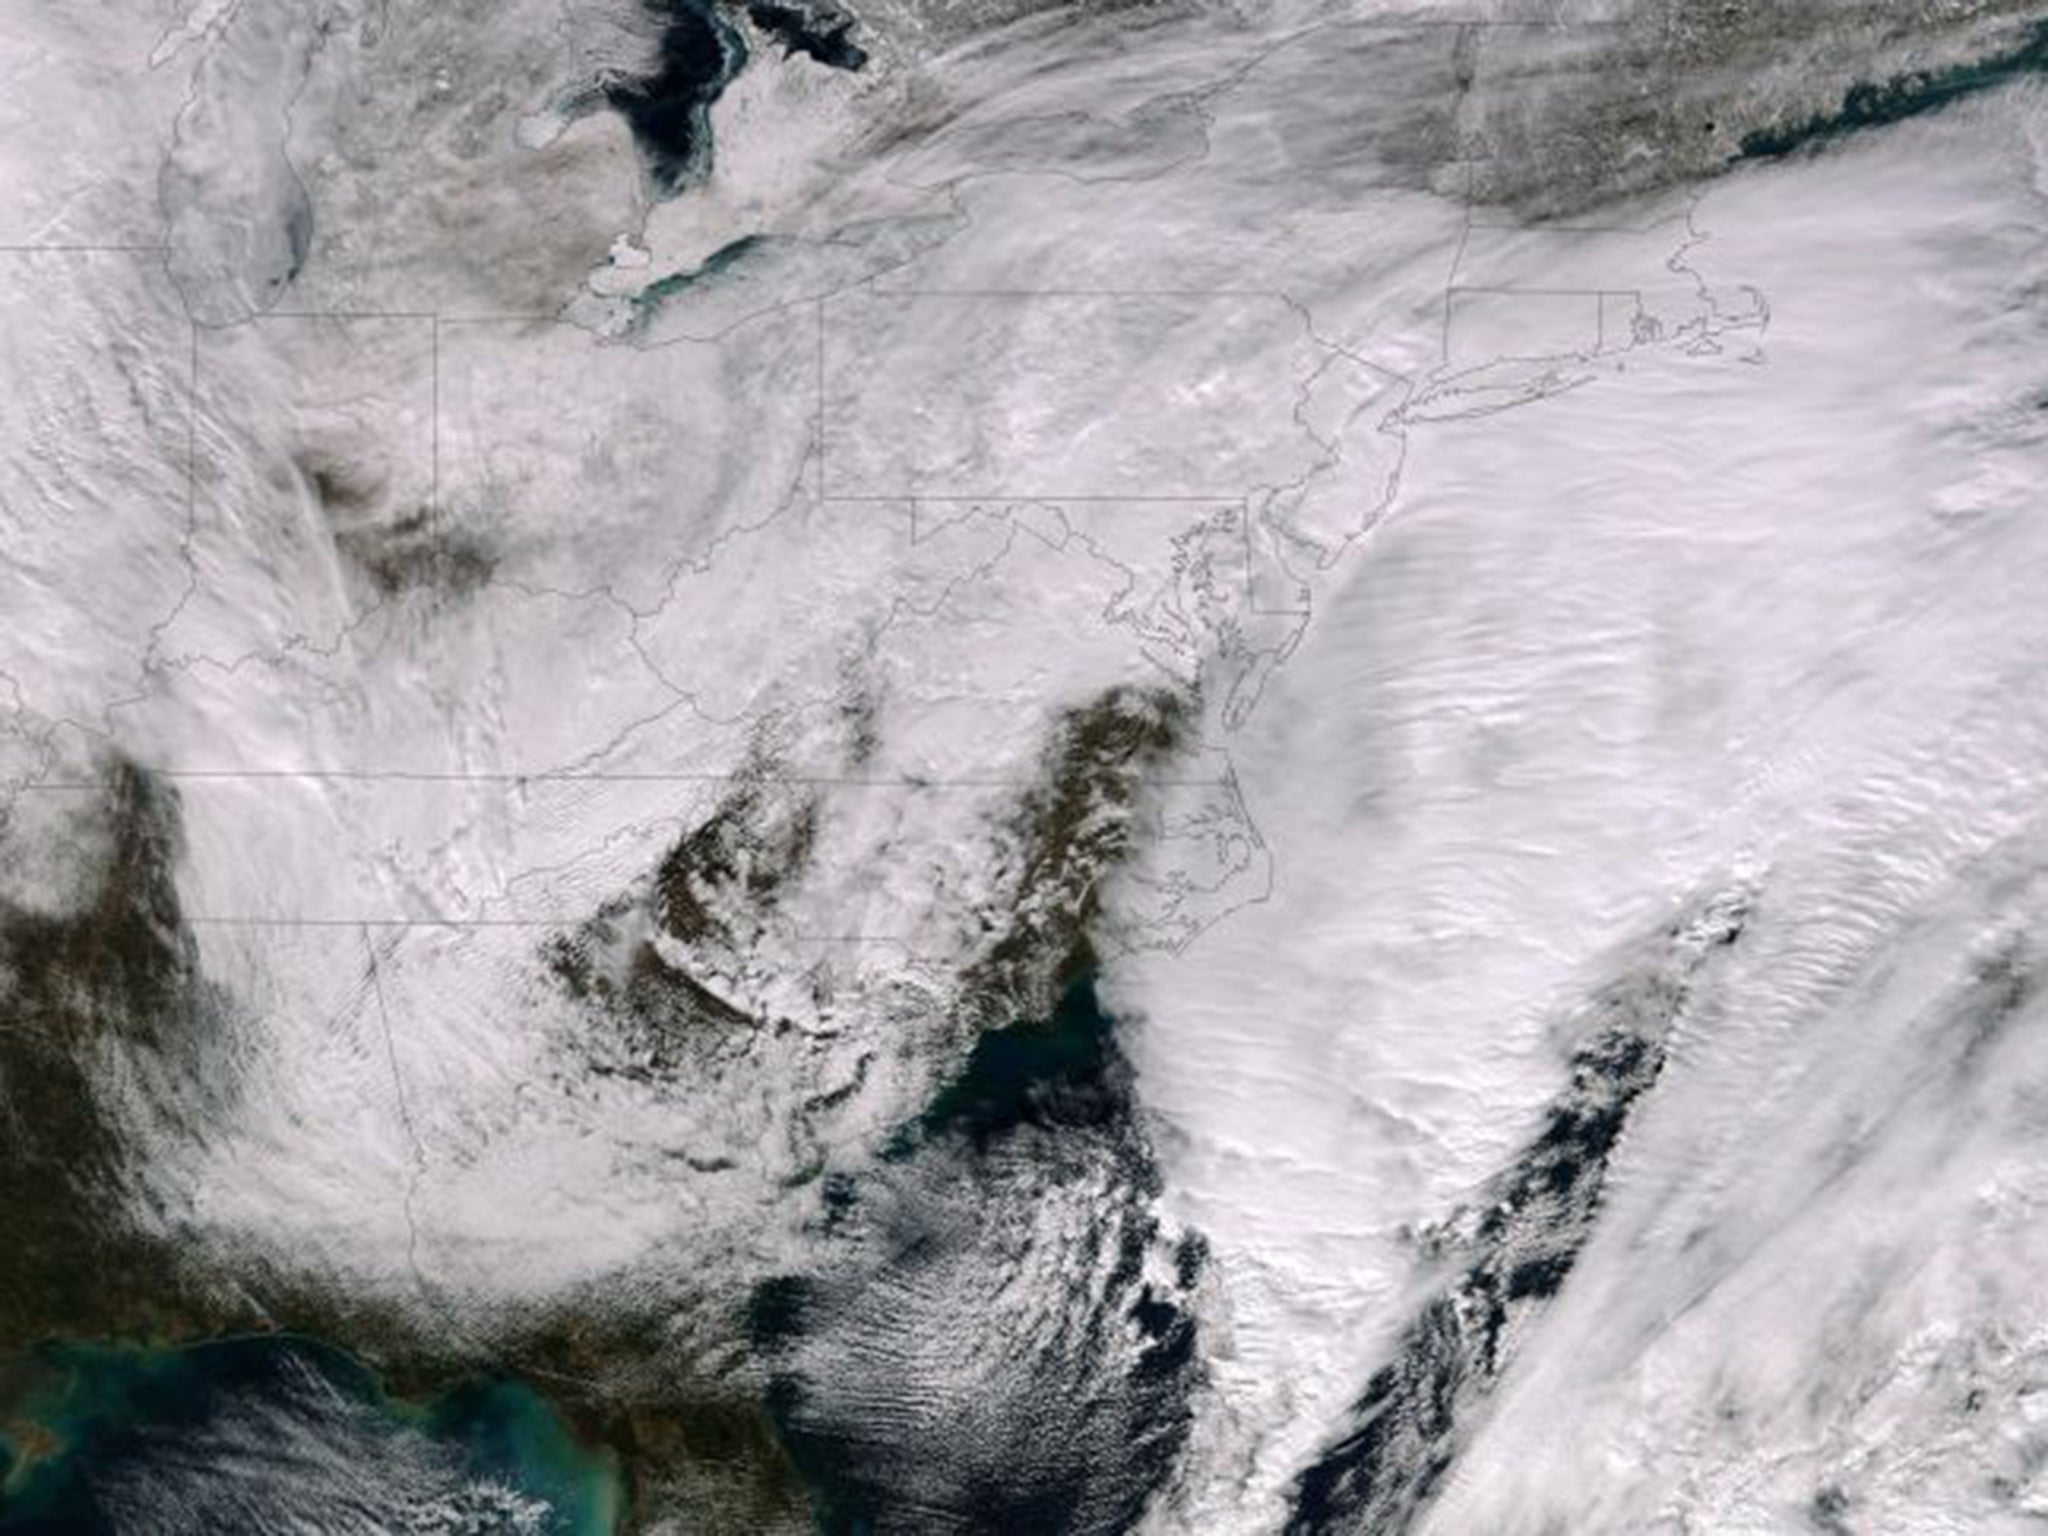 A satellite photograph shows a major winter storm bringing snow to the Northeast of the US